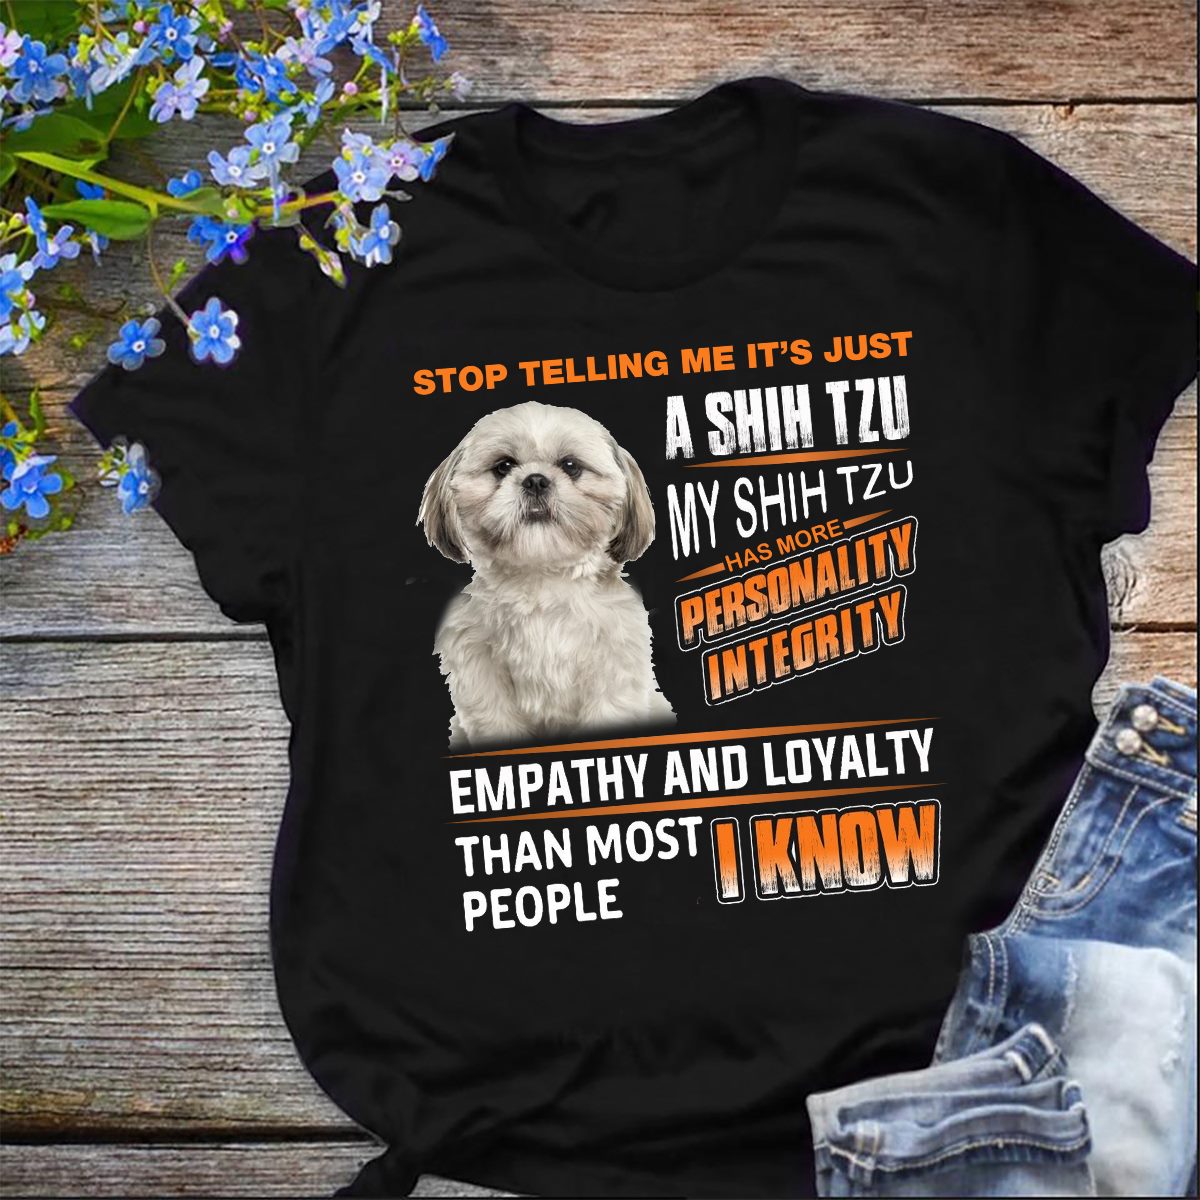 Stop telling me It's just a Shih Tzu my Shih Tzu has more personality intergrity - Dog lover